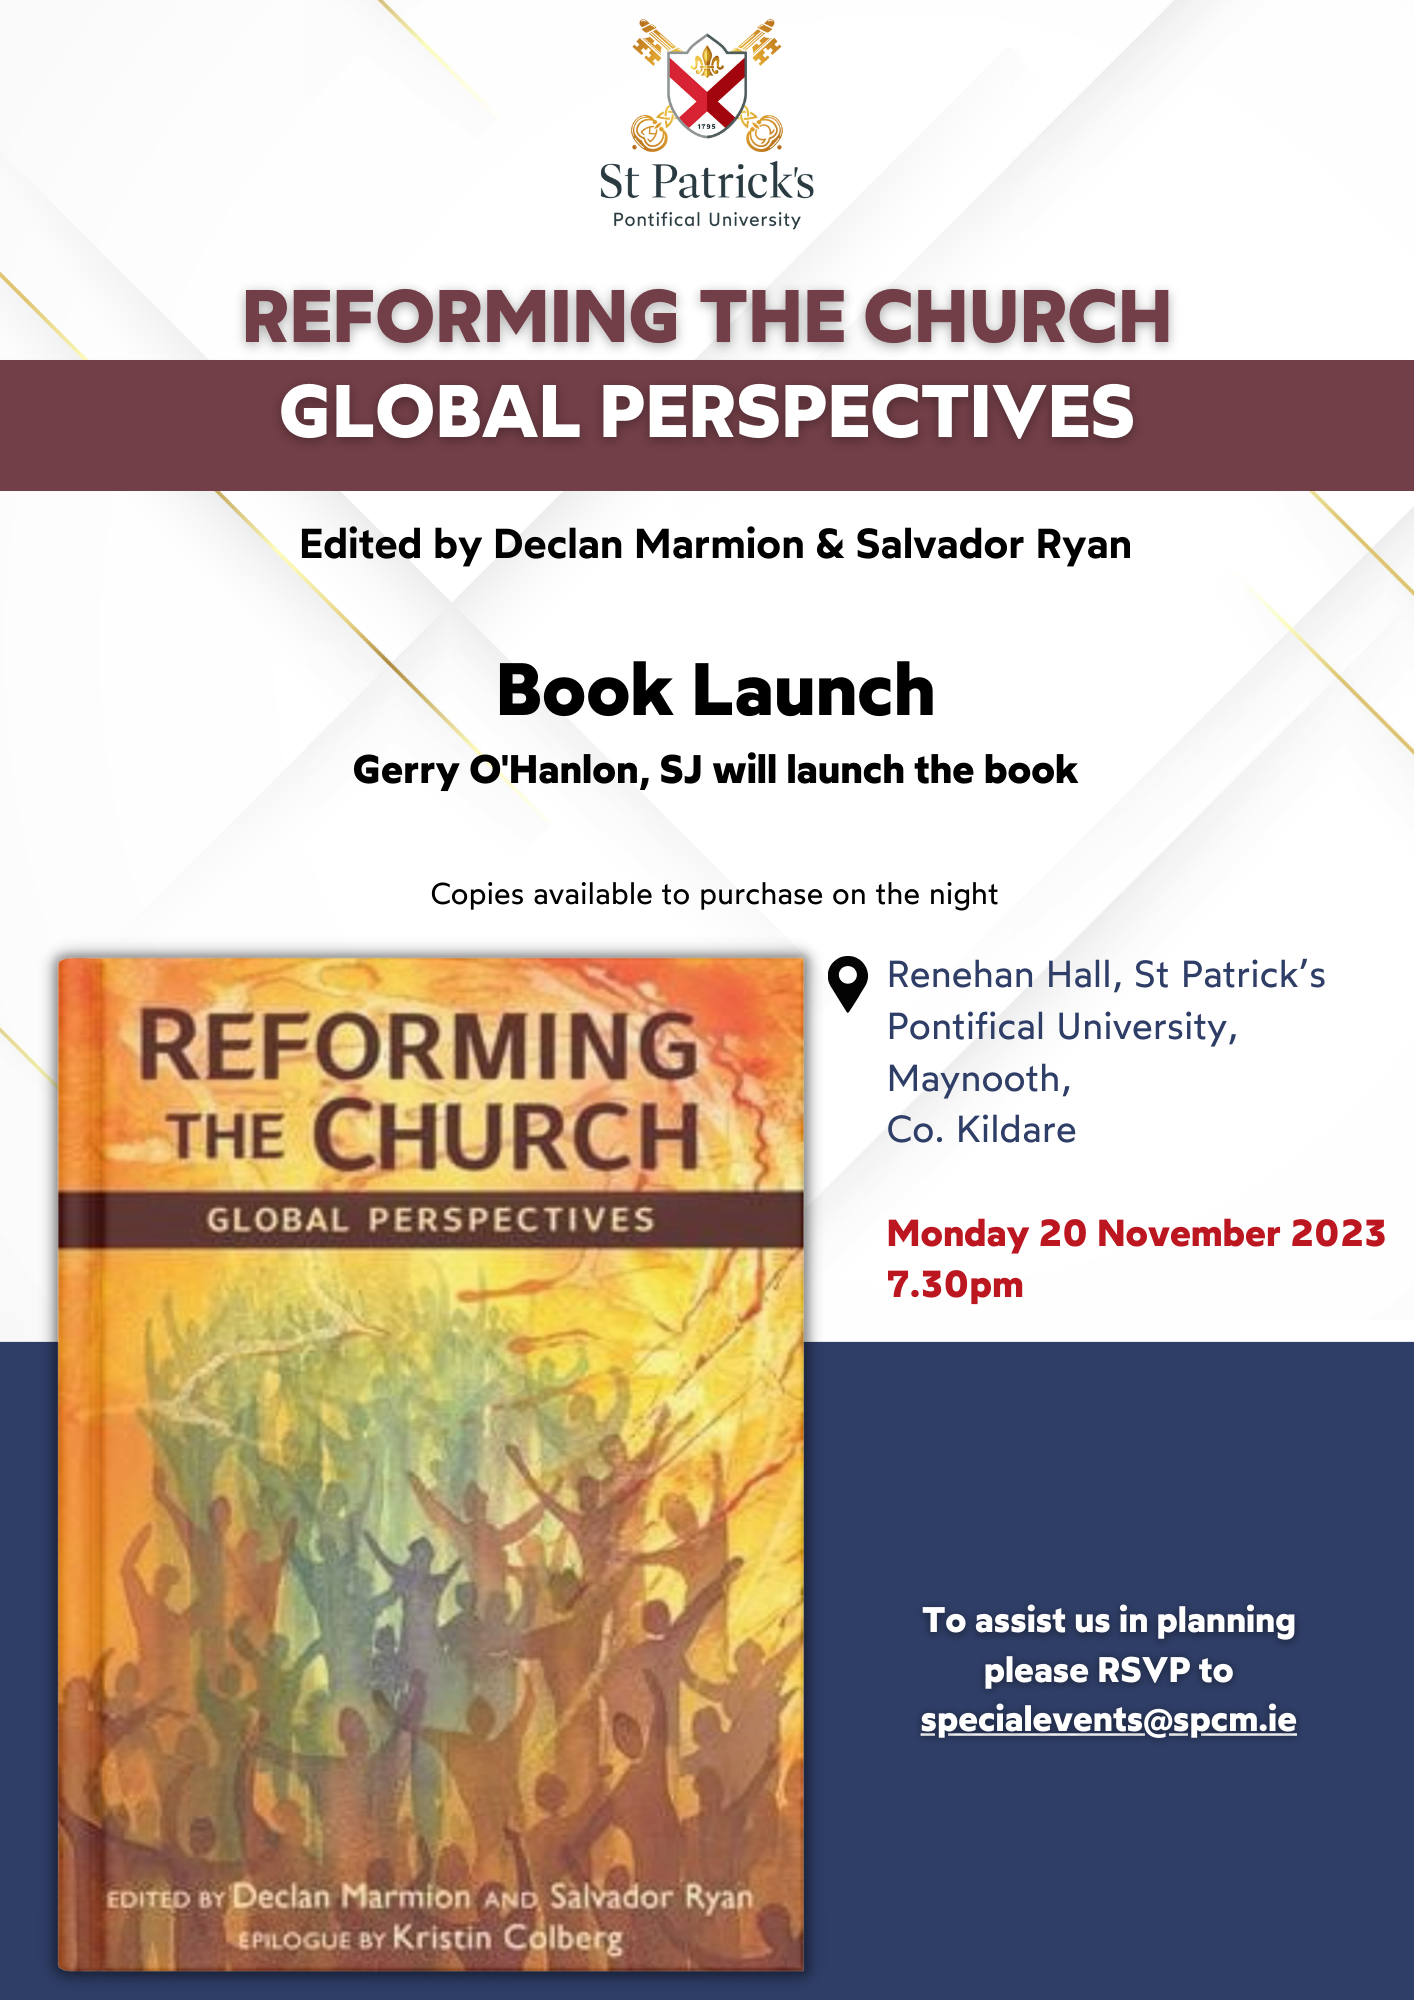 Reforming-the-Church-Book-Launch-1.png#asset:14616